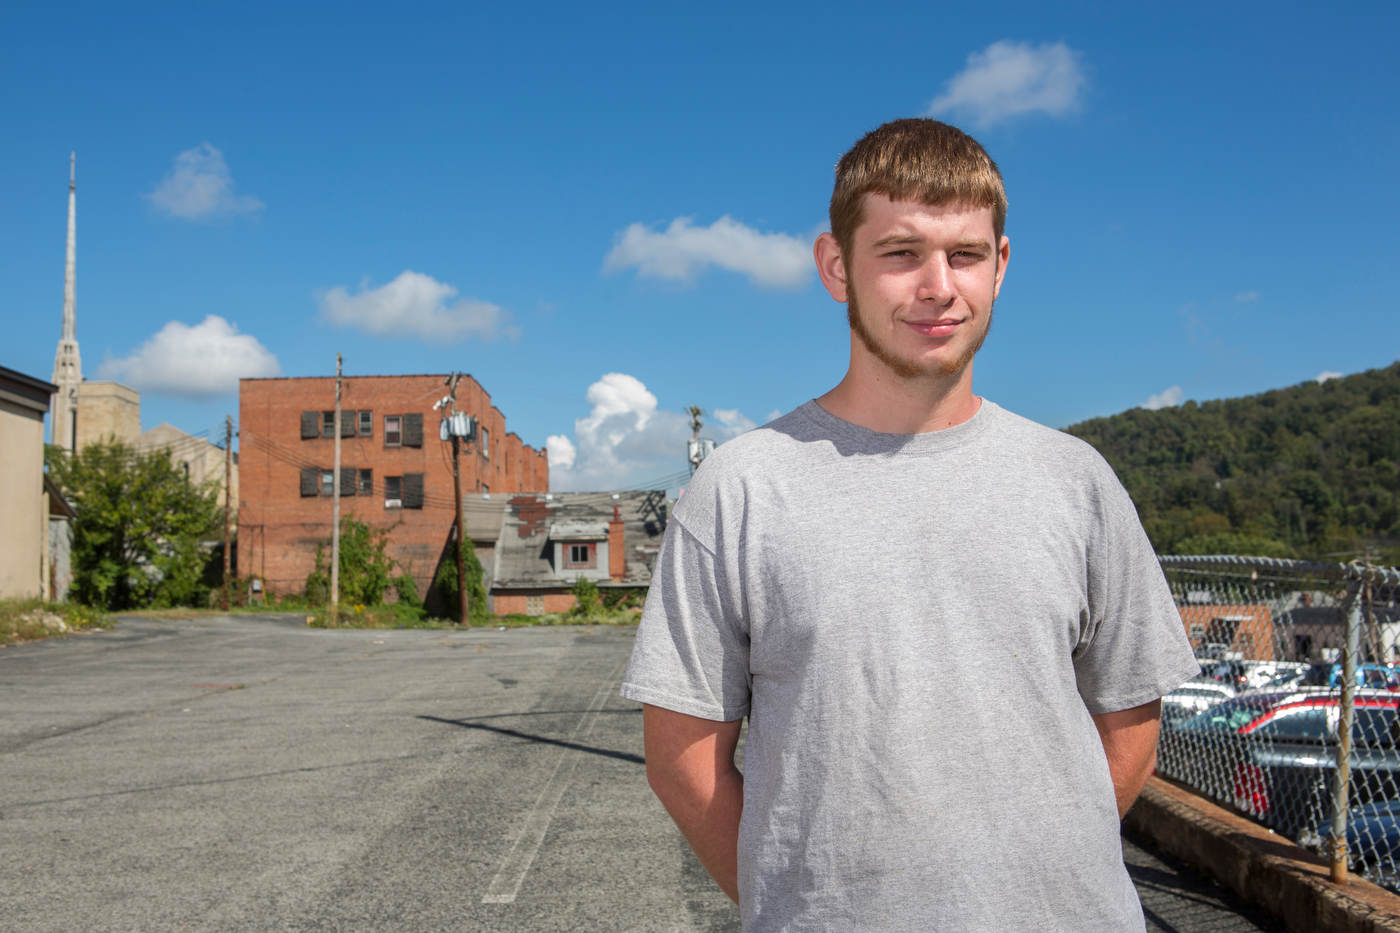 {quote}I am a big Trump fan, he will bring back the coal industry and send illegal immigrants who take our benefits back where they belong{quote}, Brady Ross, 19, who just lost his job as a flagger in oil drilling | Clarksburg, West Virginia. 